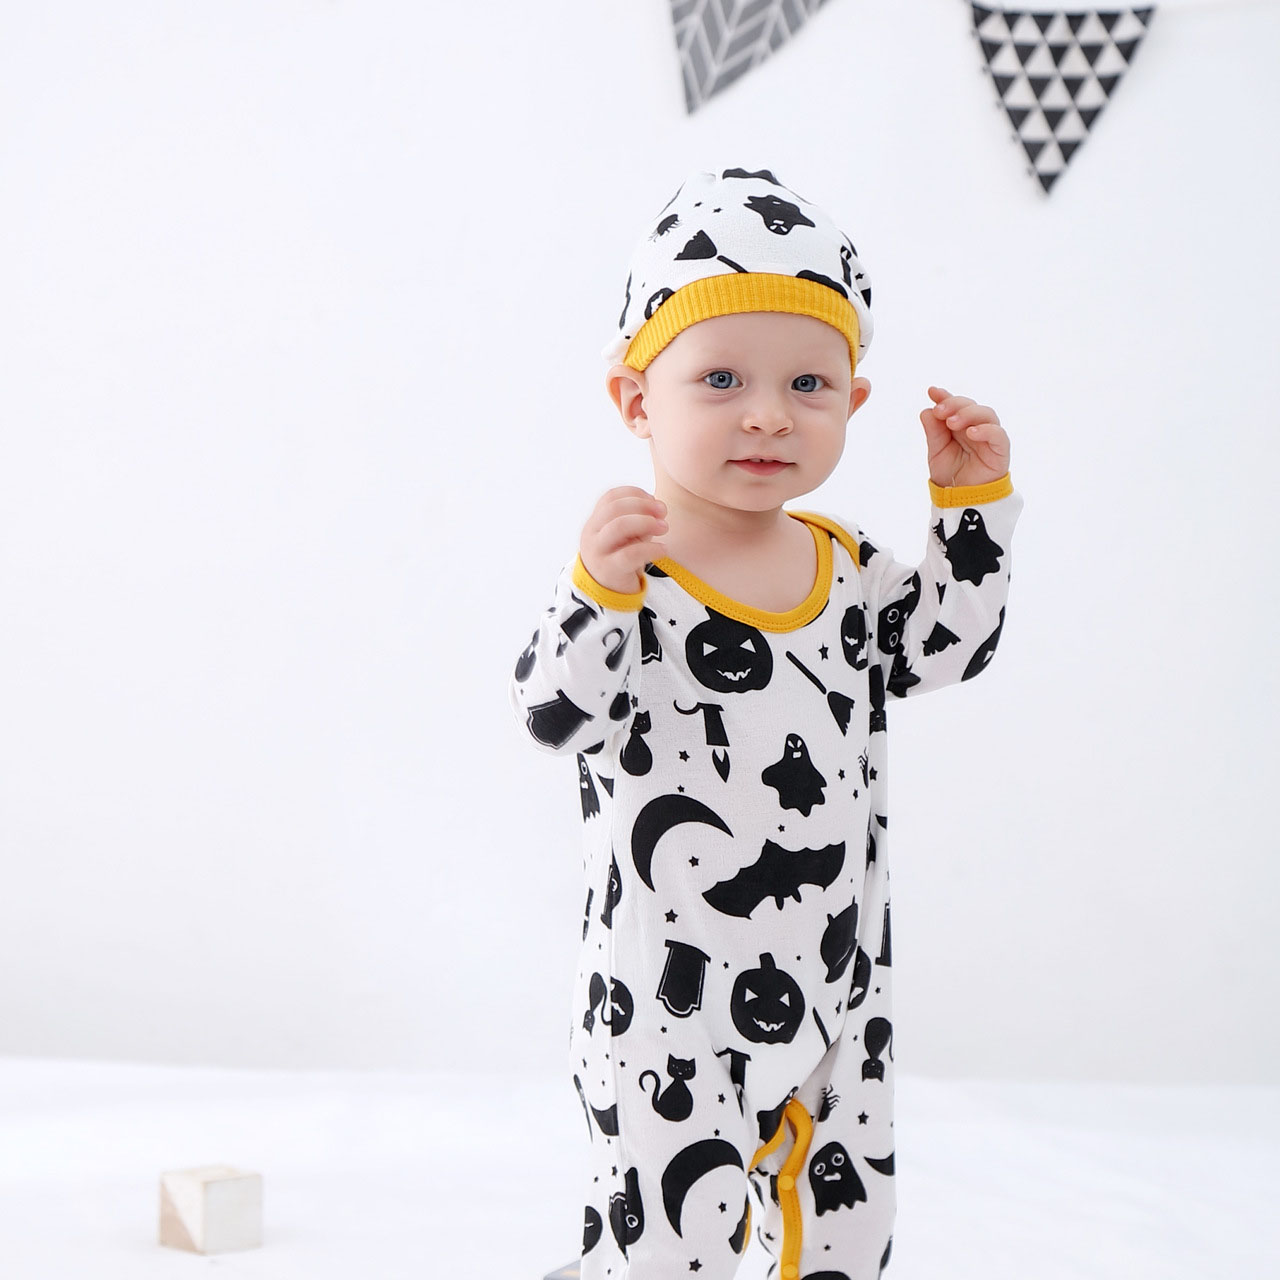 

Babys Designer Crawling Suits Boys Childrens Wear Halloween Pumpkin Letter Printing Dress + Hat Coverall Letter Print Clothes, Gray